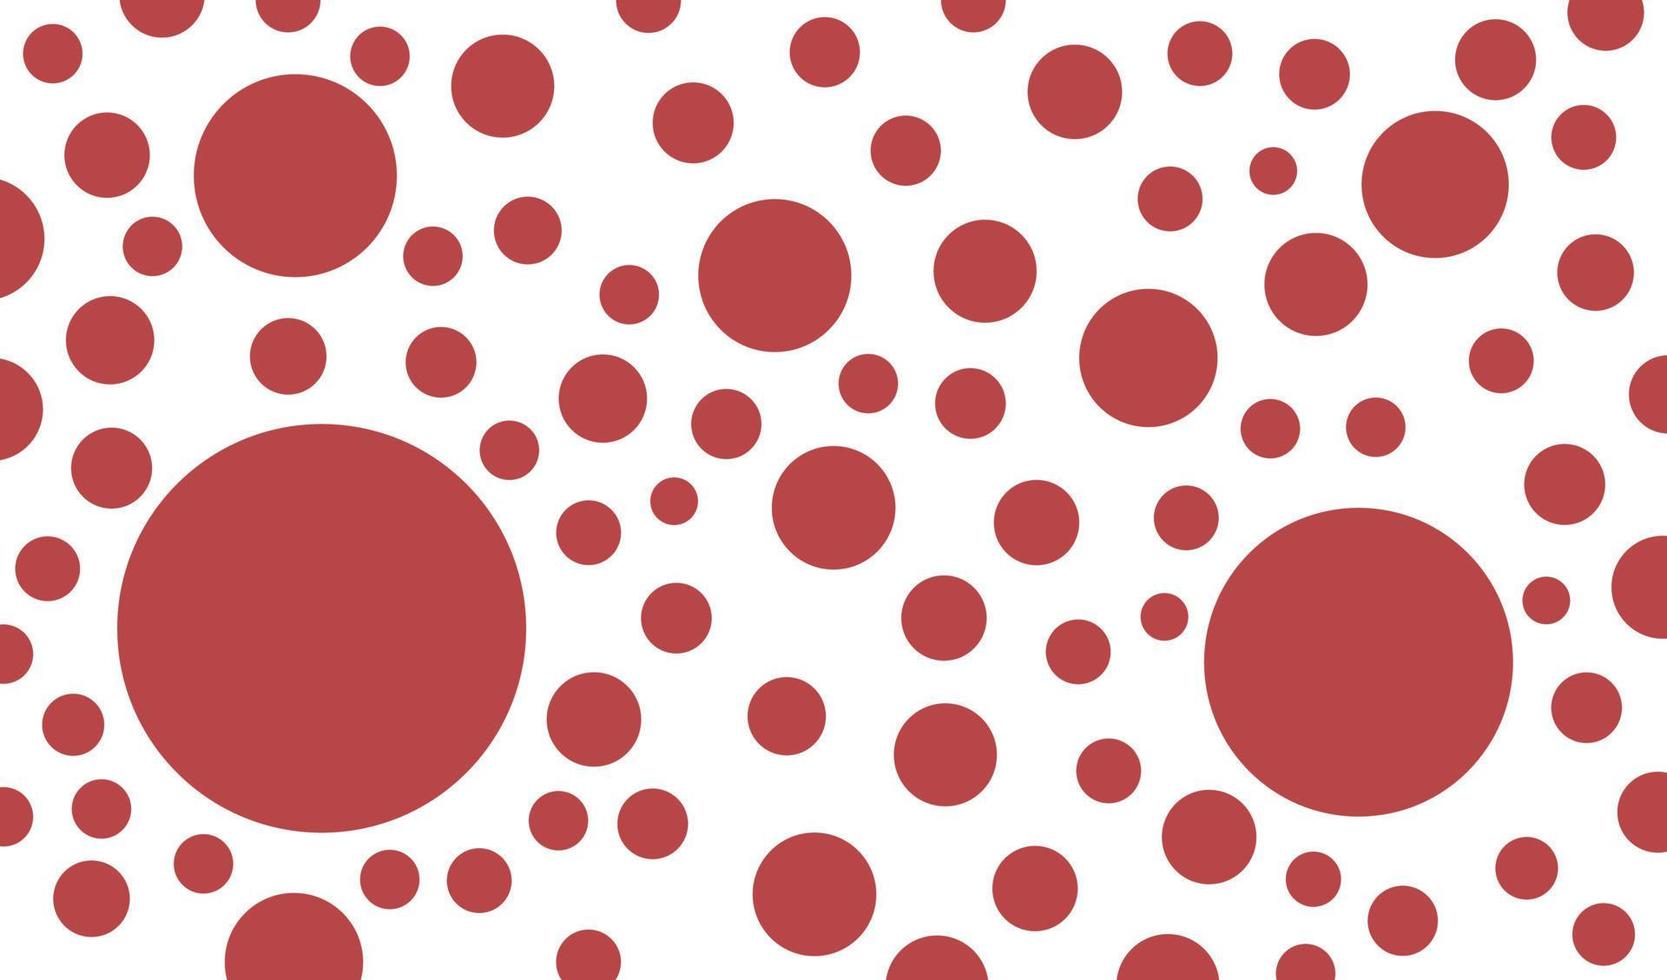 abstract red polkadots art pattern white background vector